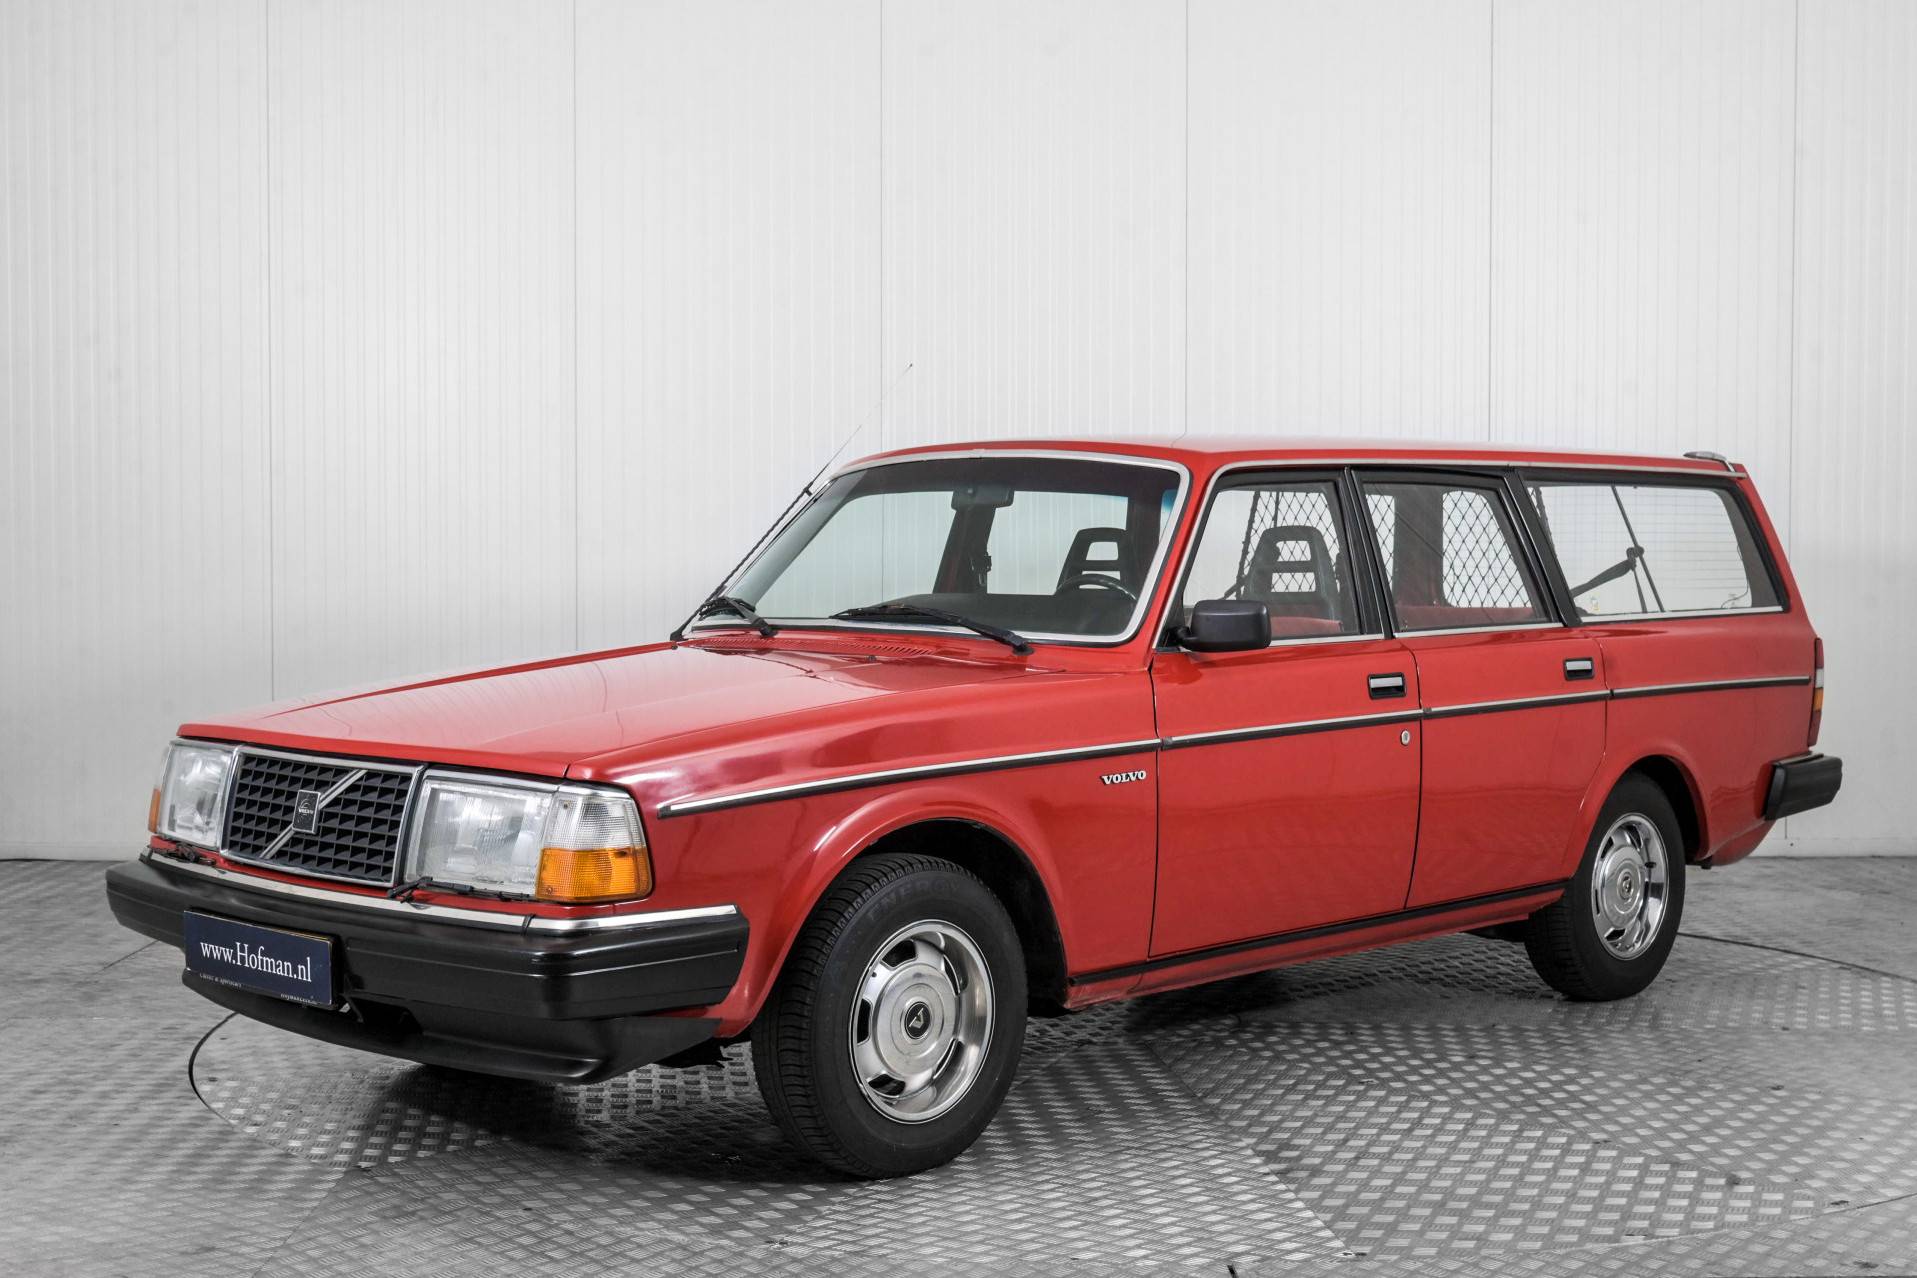 Volvo Classic Cars for Sale - Classic Trader